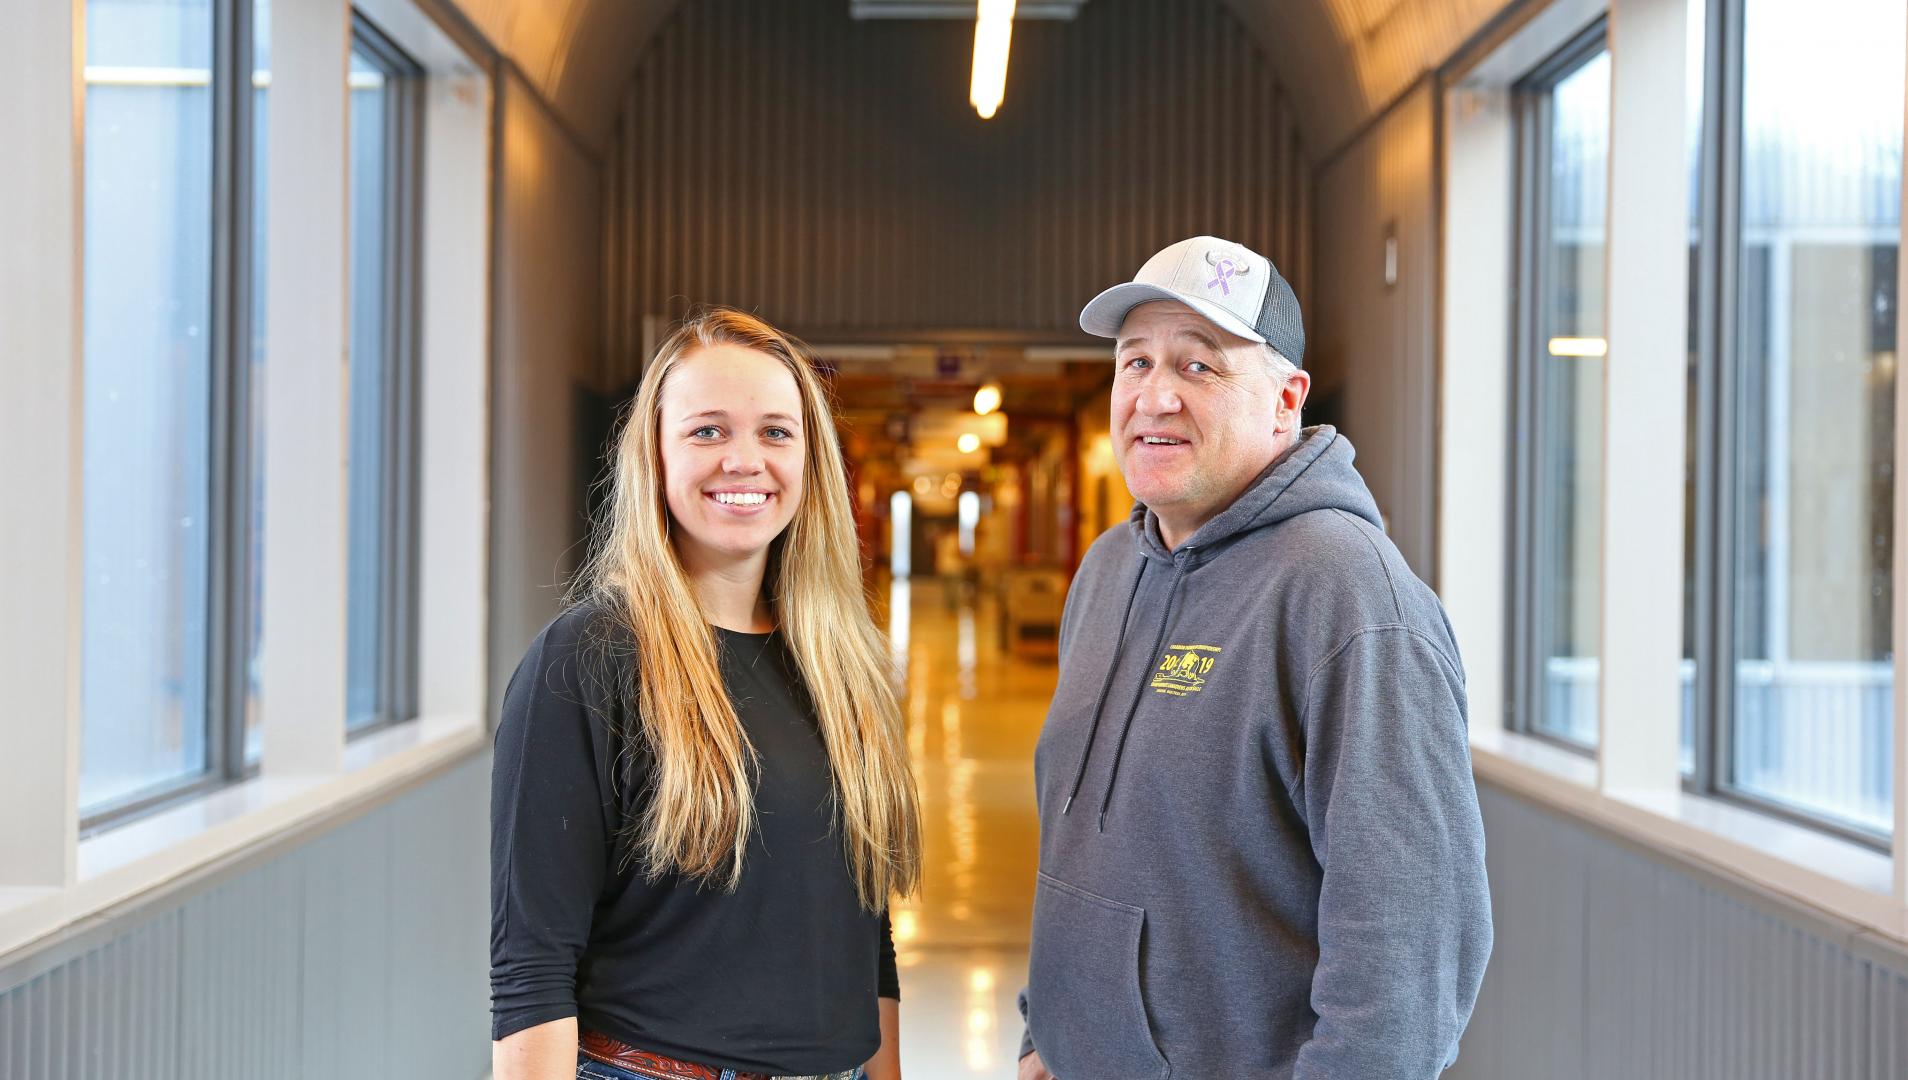 Tim and Kylie Gompf pose in the hallway at Assiniboine, where they both took agriculture programs